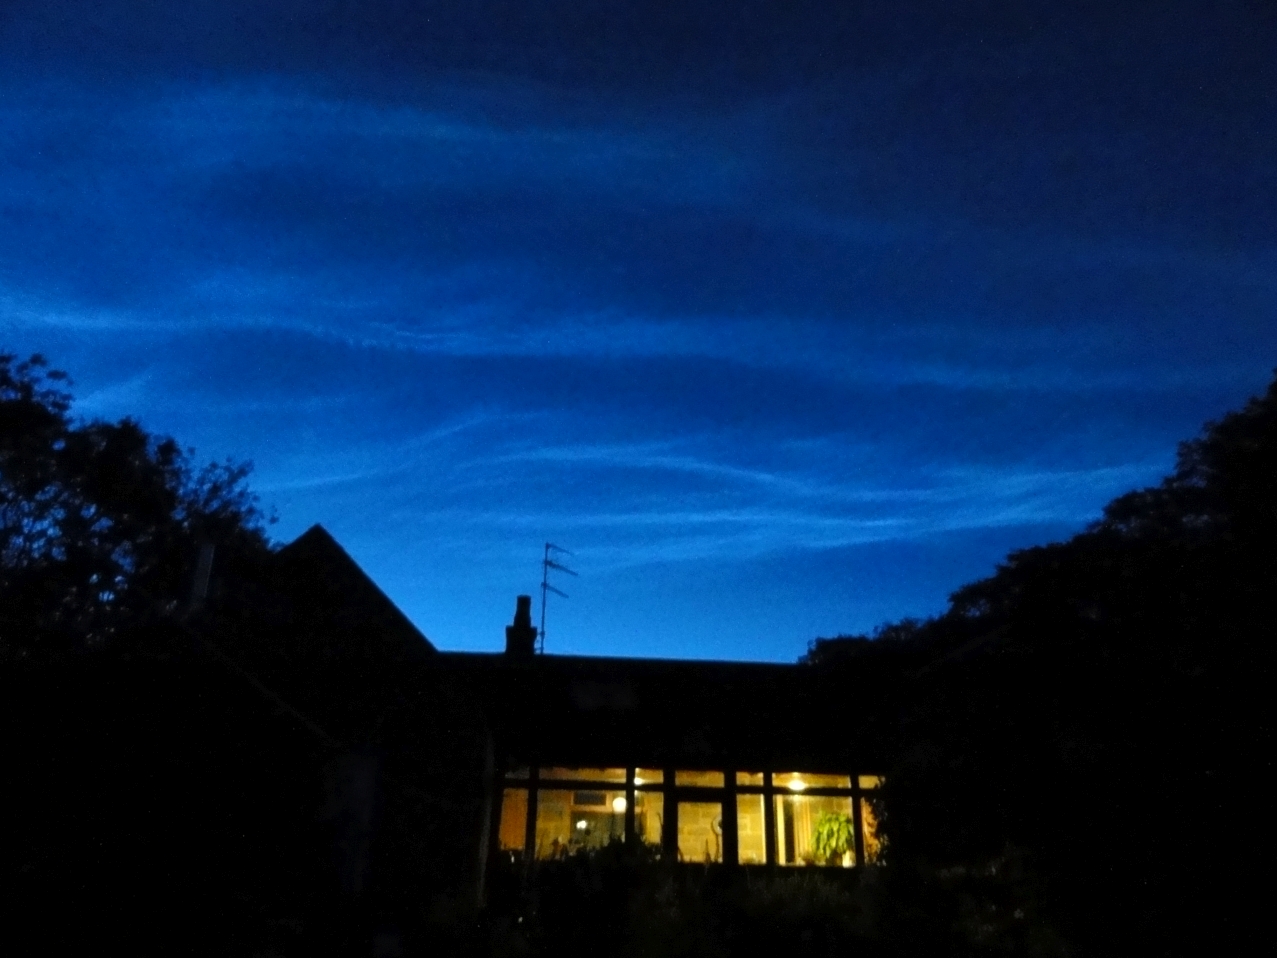 NLC from June at 23:23pm